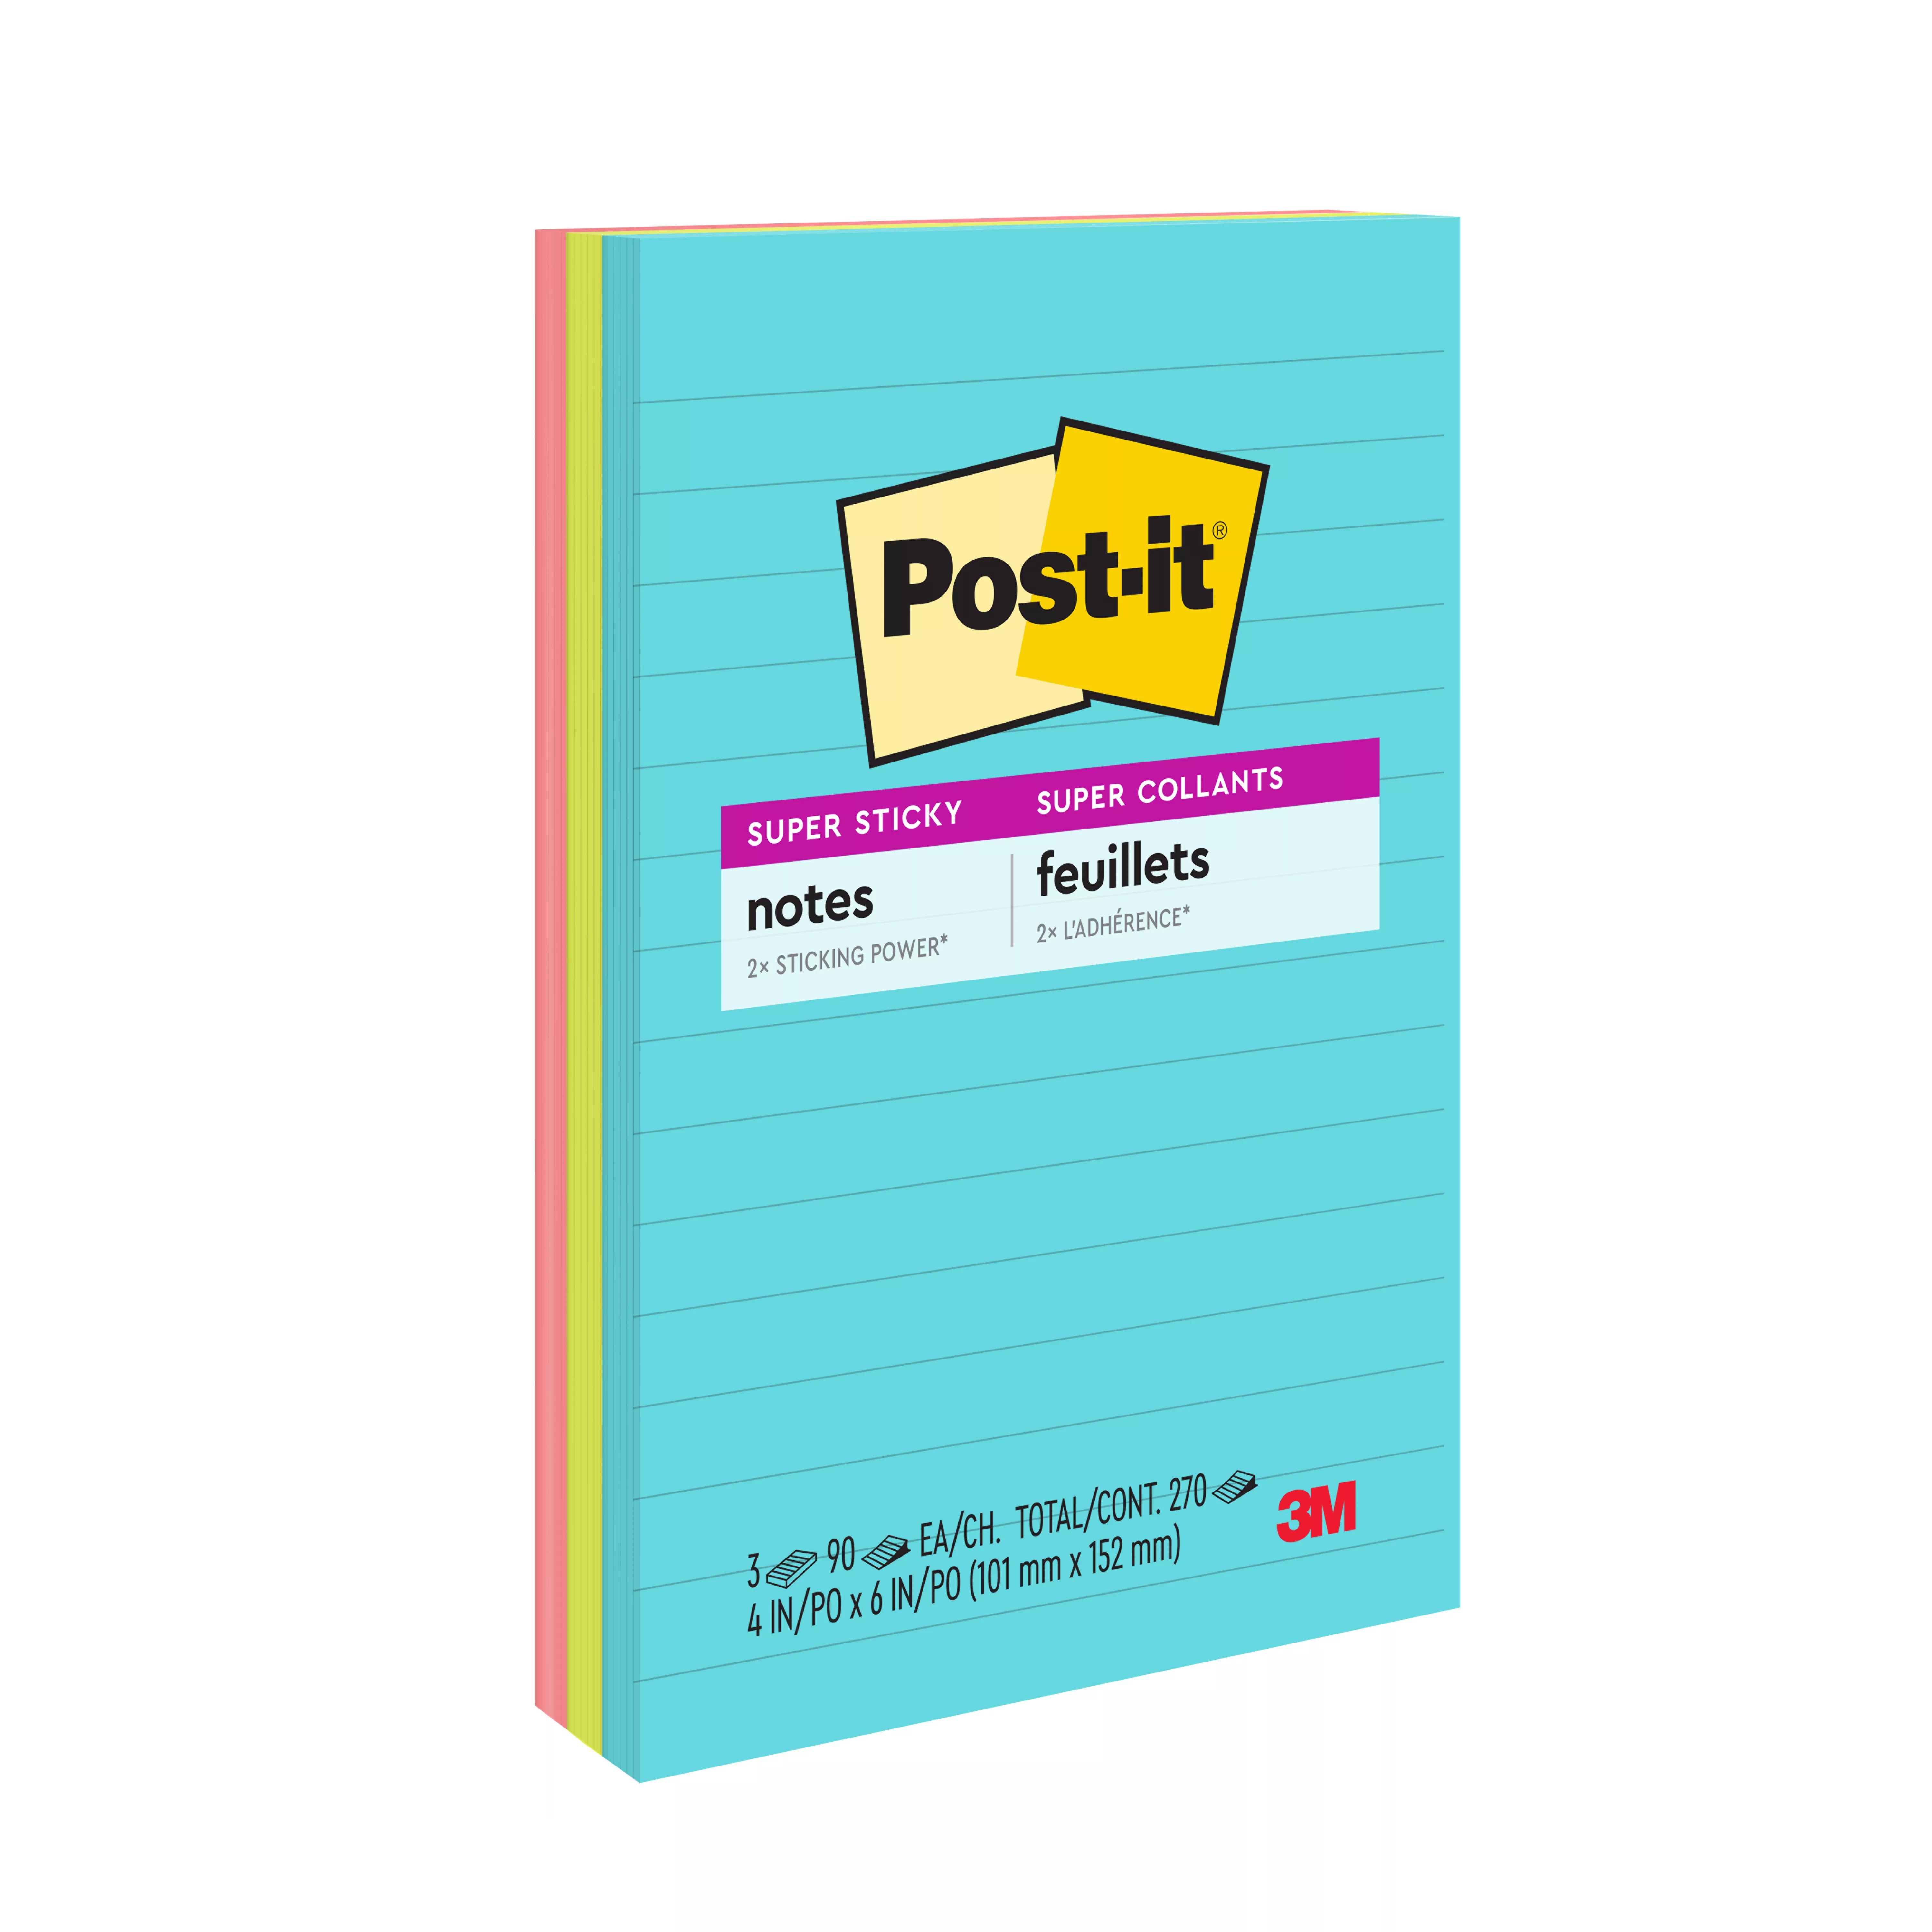 Post-it® Super Sticky Notes 660-3SSMIA, 4 in x 6 in (101 mm x 152 mm), Supernova Neons Collection